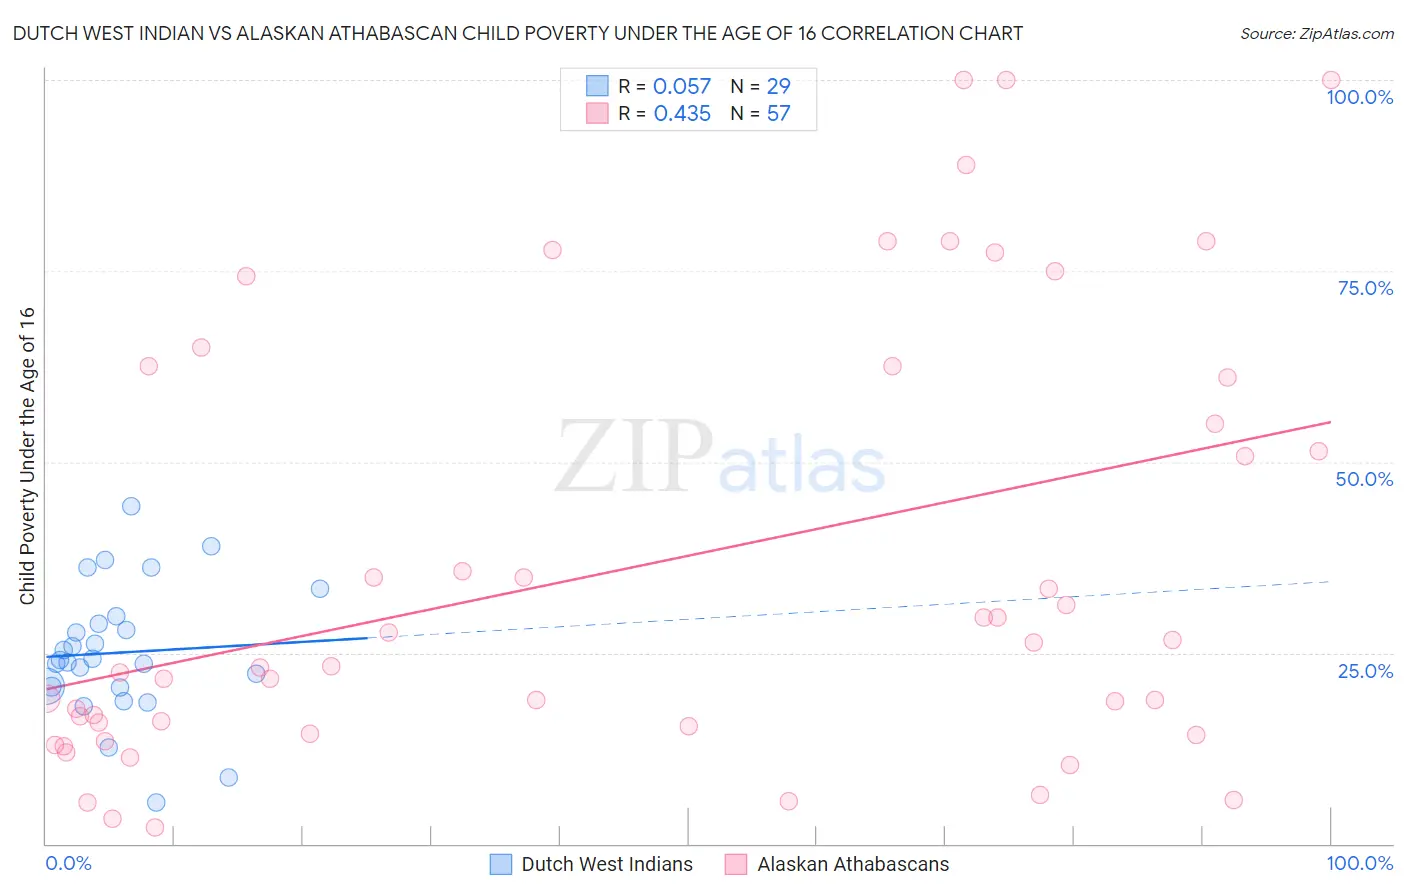 Dutch West Indian vs Alaskan Athabascan Child Poverty Under the Age of 16